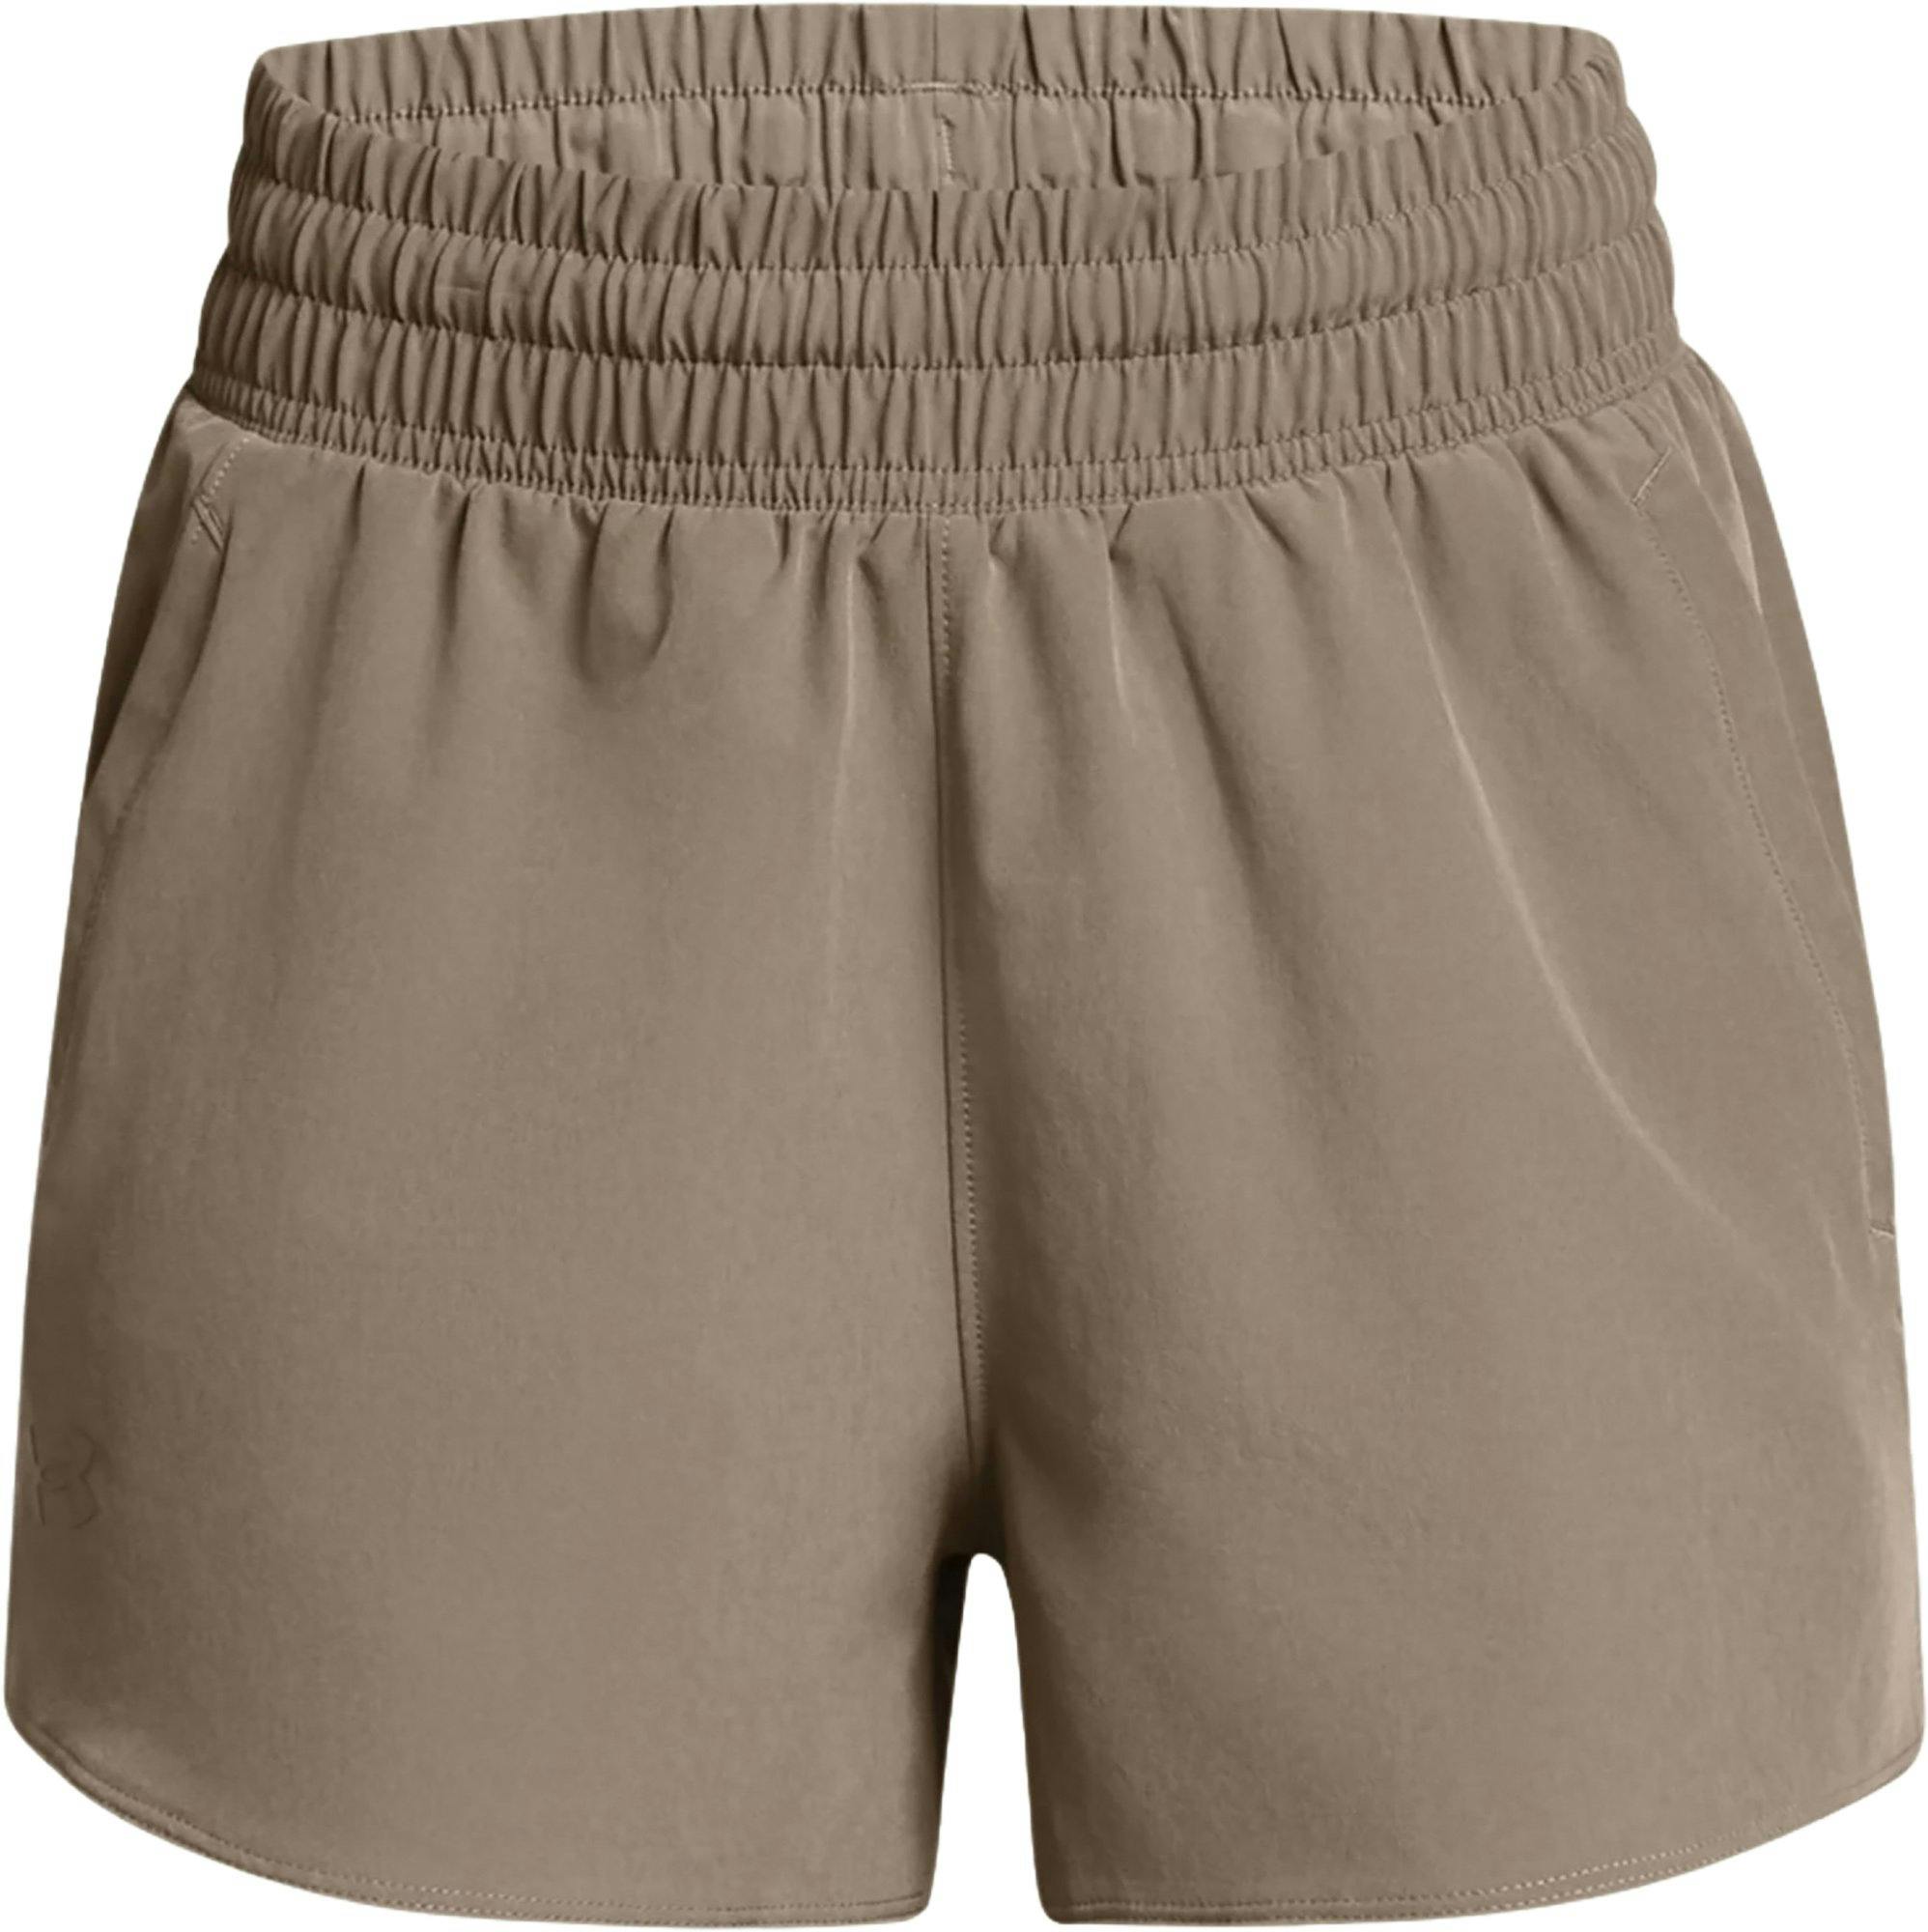 Product image for Flex Woven 3 In Shorts - Women's